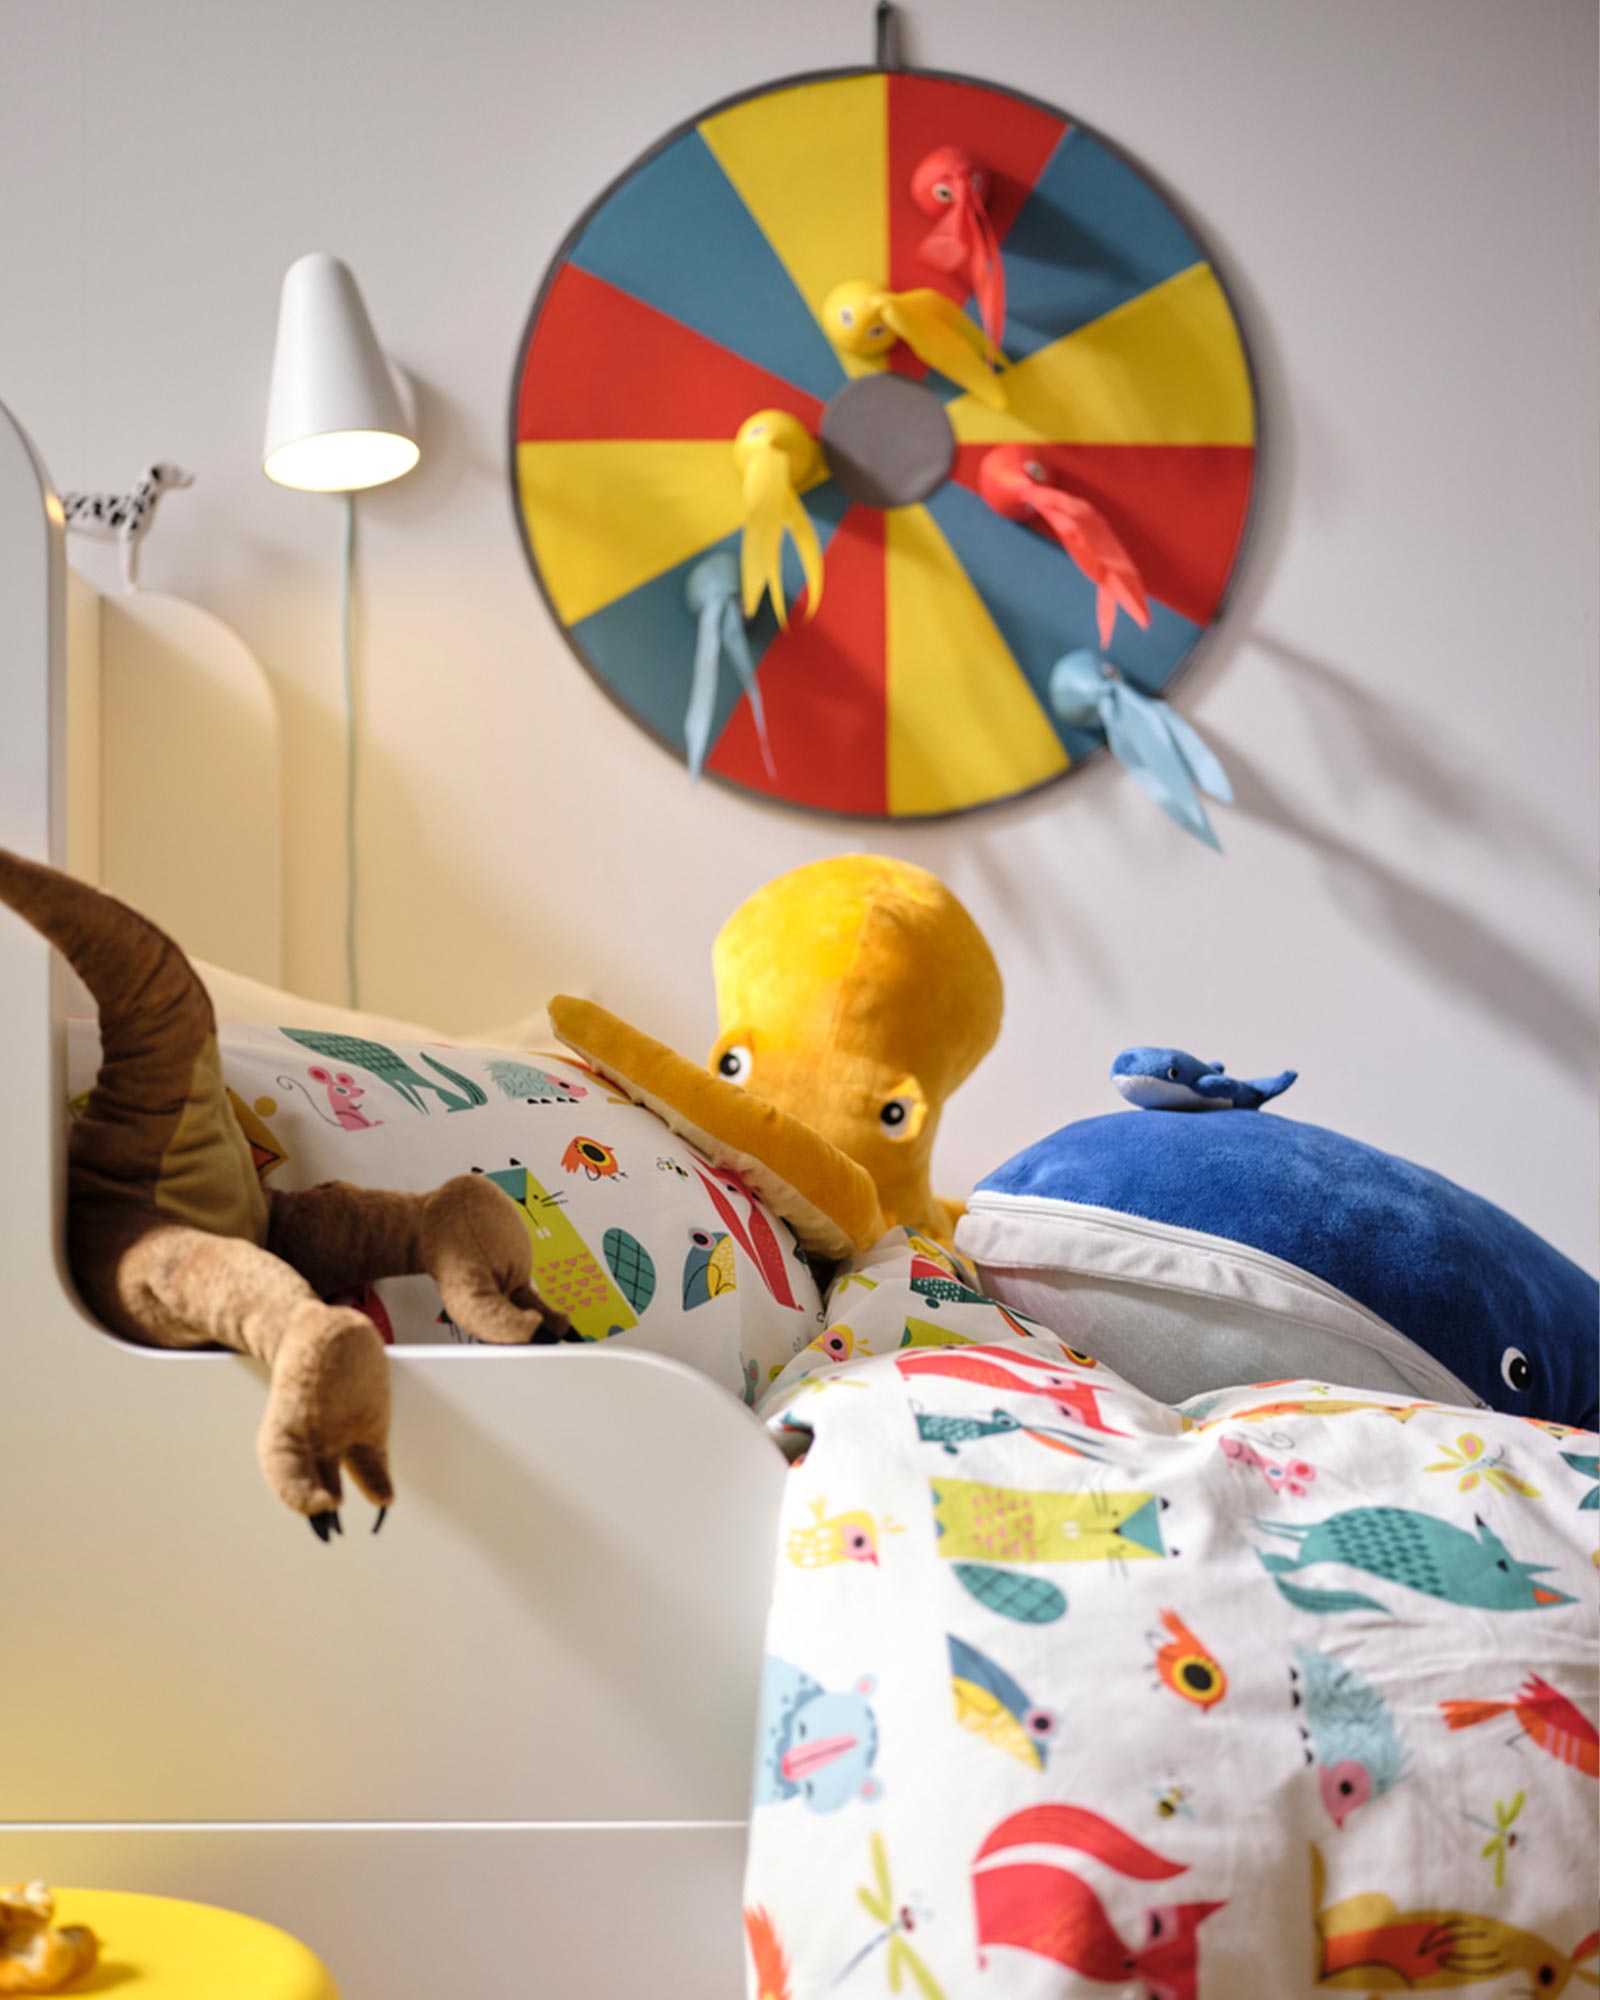 IKEA-a small childrens room 05